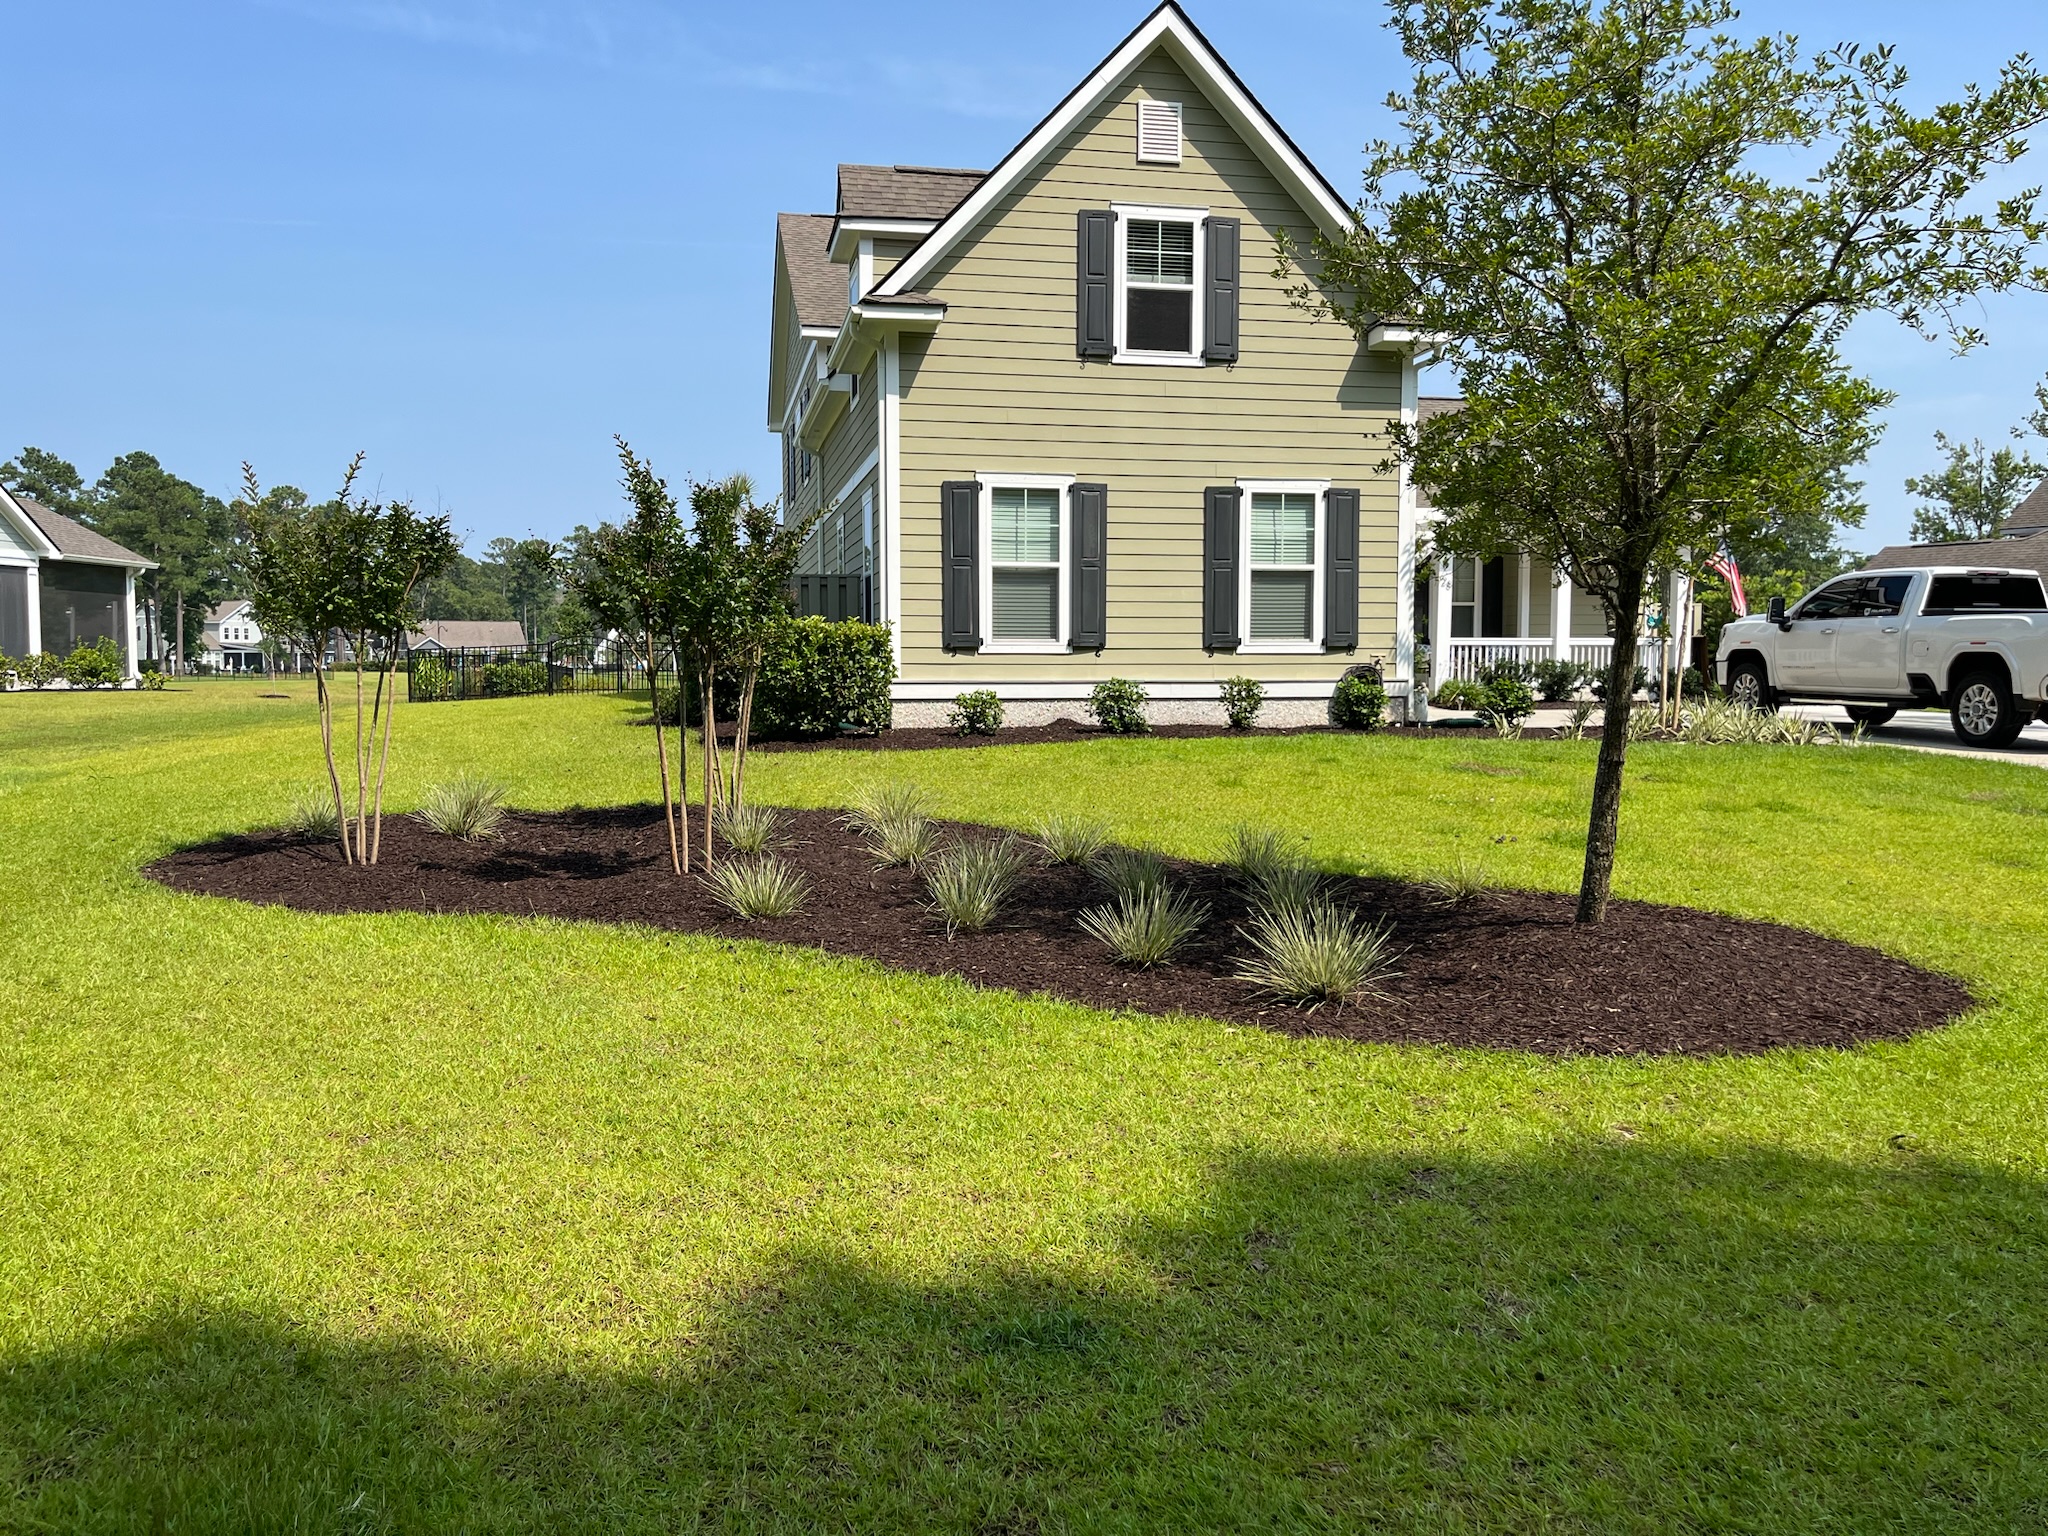 Residential mulching services in Bluffton, SC